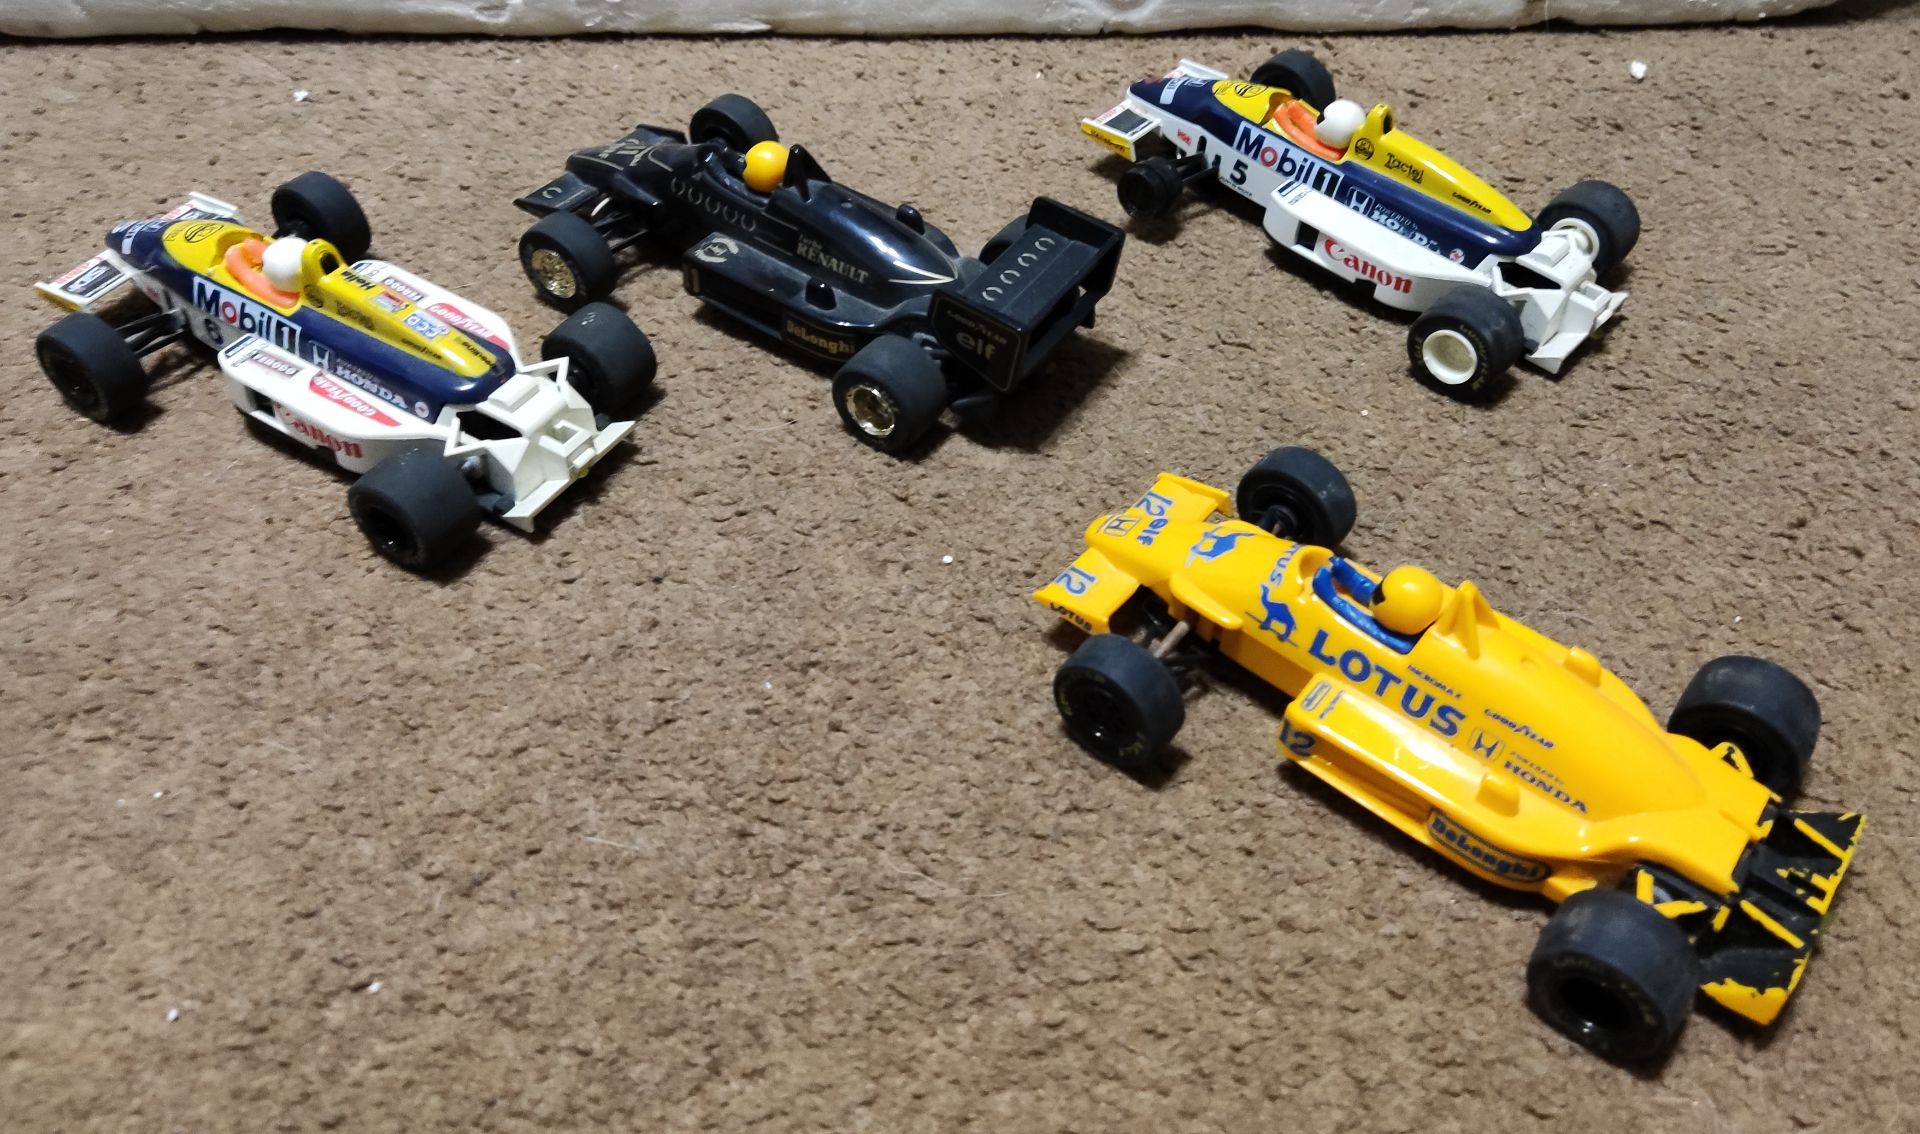 1 x Scalextric 4-Lane World Championship Set With 4 x F1 Cars - Huge Vintage Set - Used - CL444 - NO - Image 14 of 26